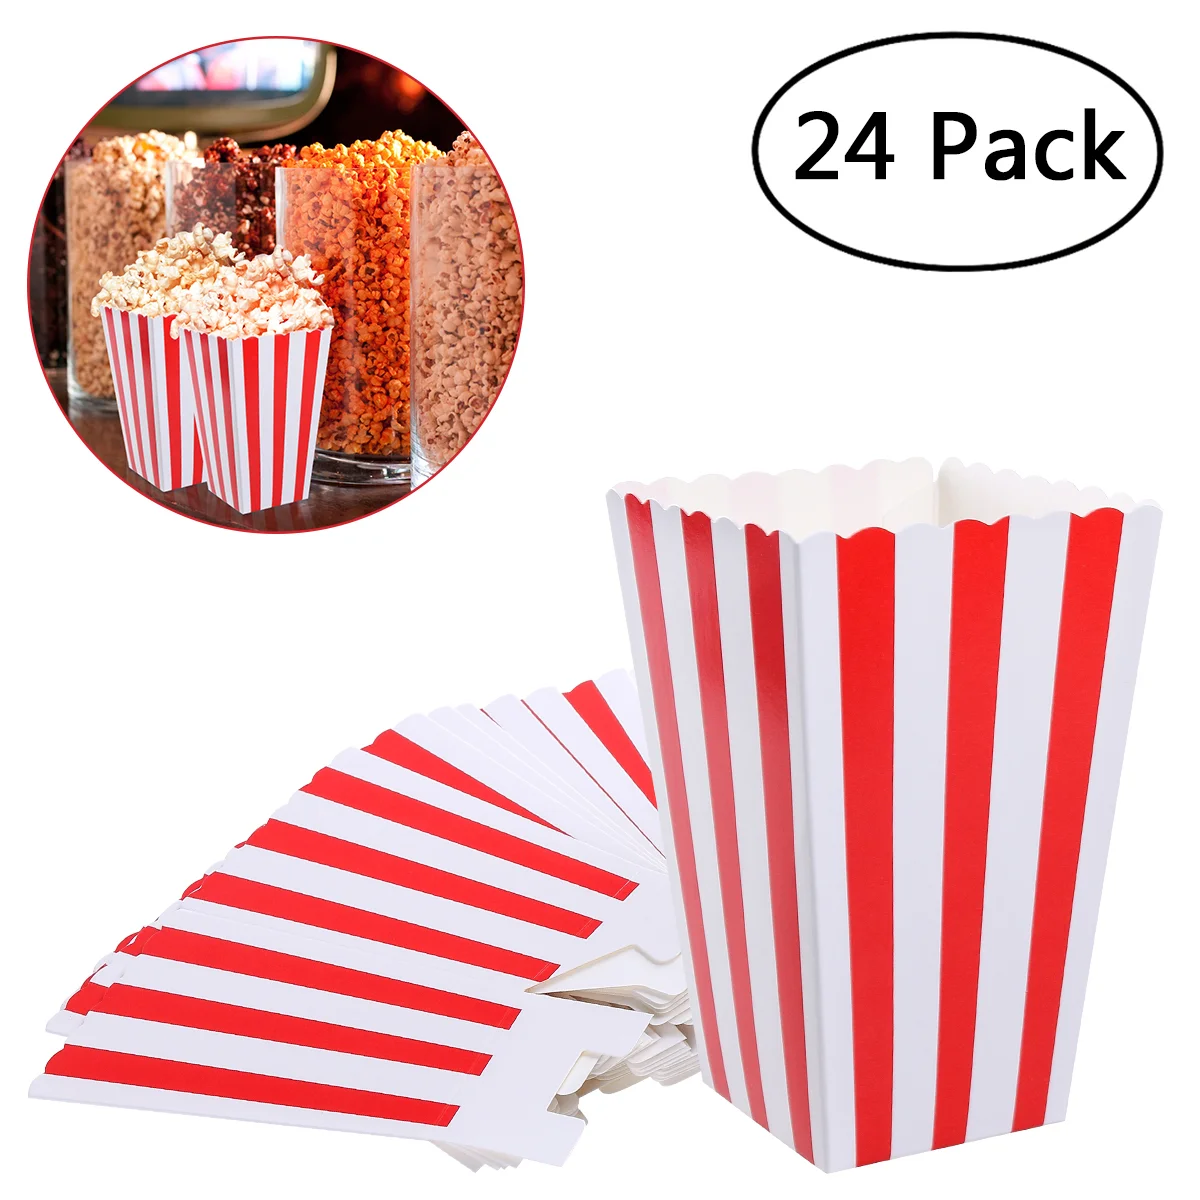 

24pcs Popcorn Boxes Holder Paper Box Striped White And Red Paper Boxes For Movie Theater Popcorn Containers Table Wedding Favors